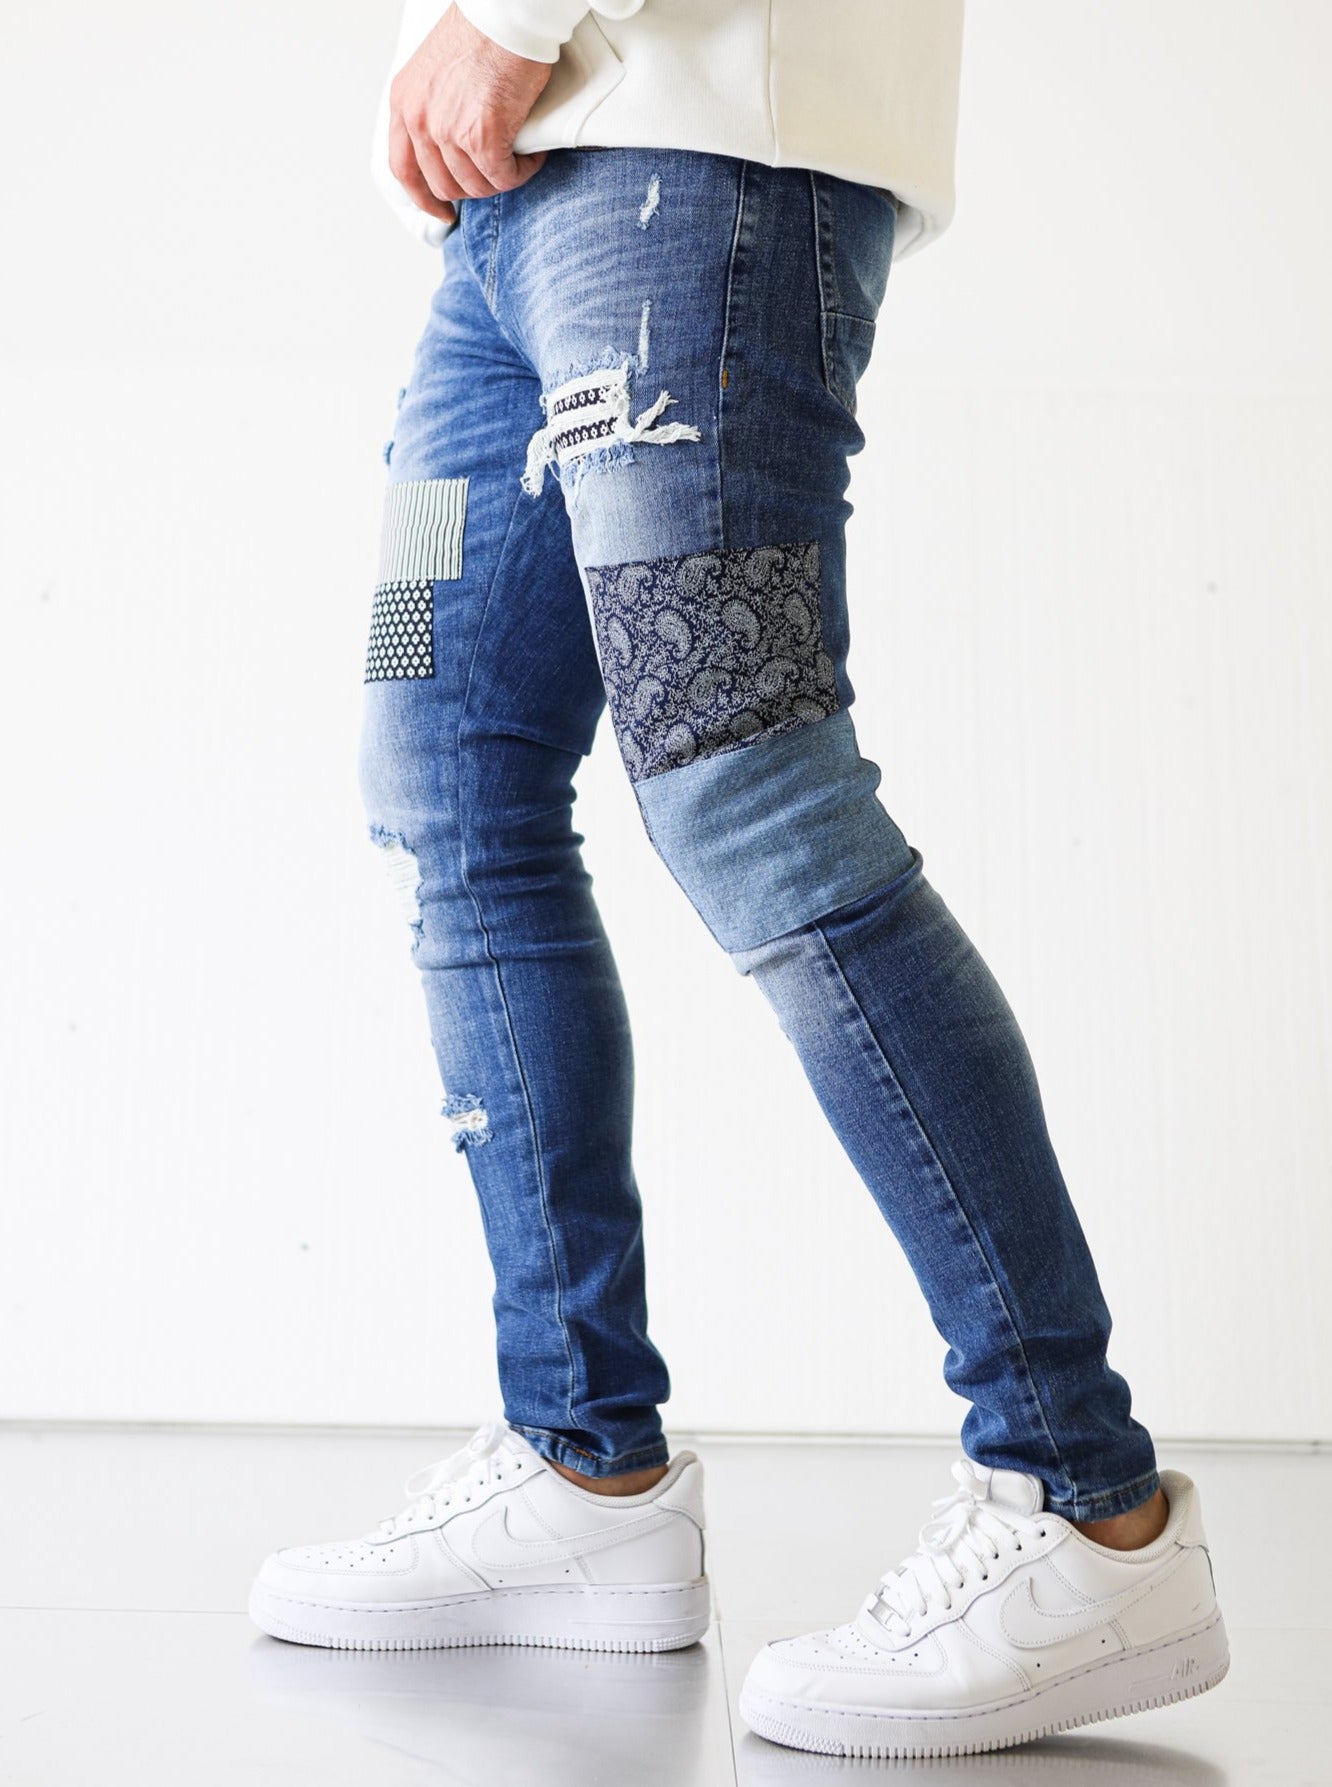 Patched Blue Skinny Jeans - UNEFFECTED STUDIOS® - JEANS - UNEFFECTED